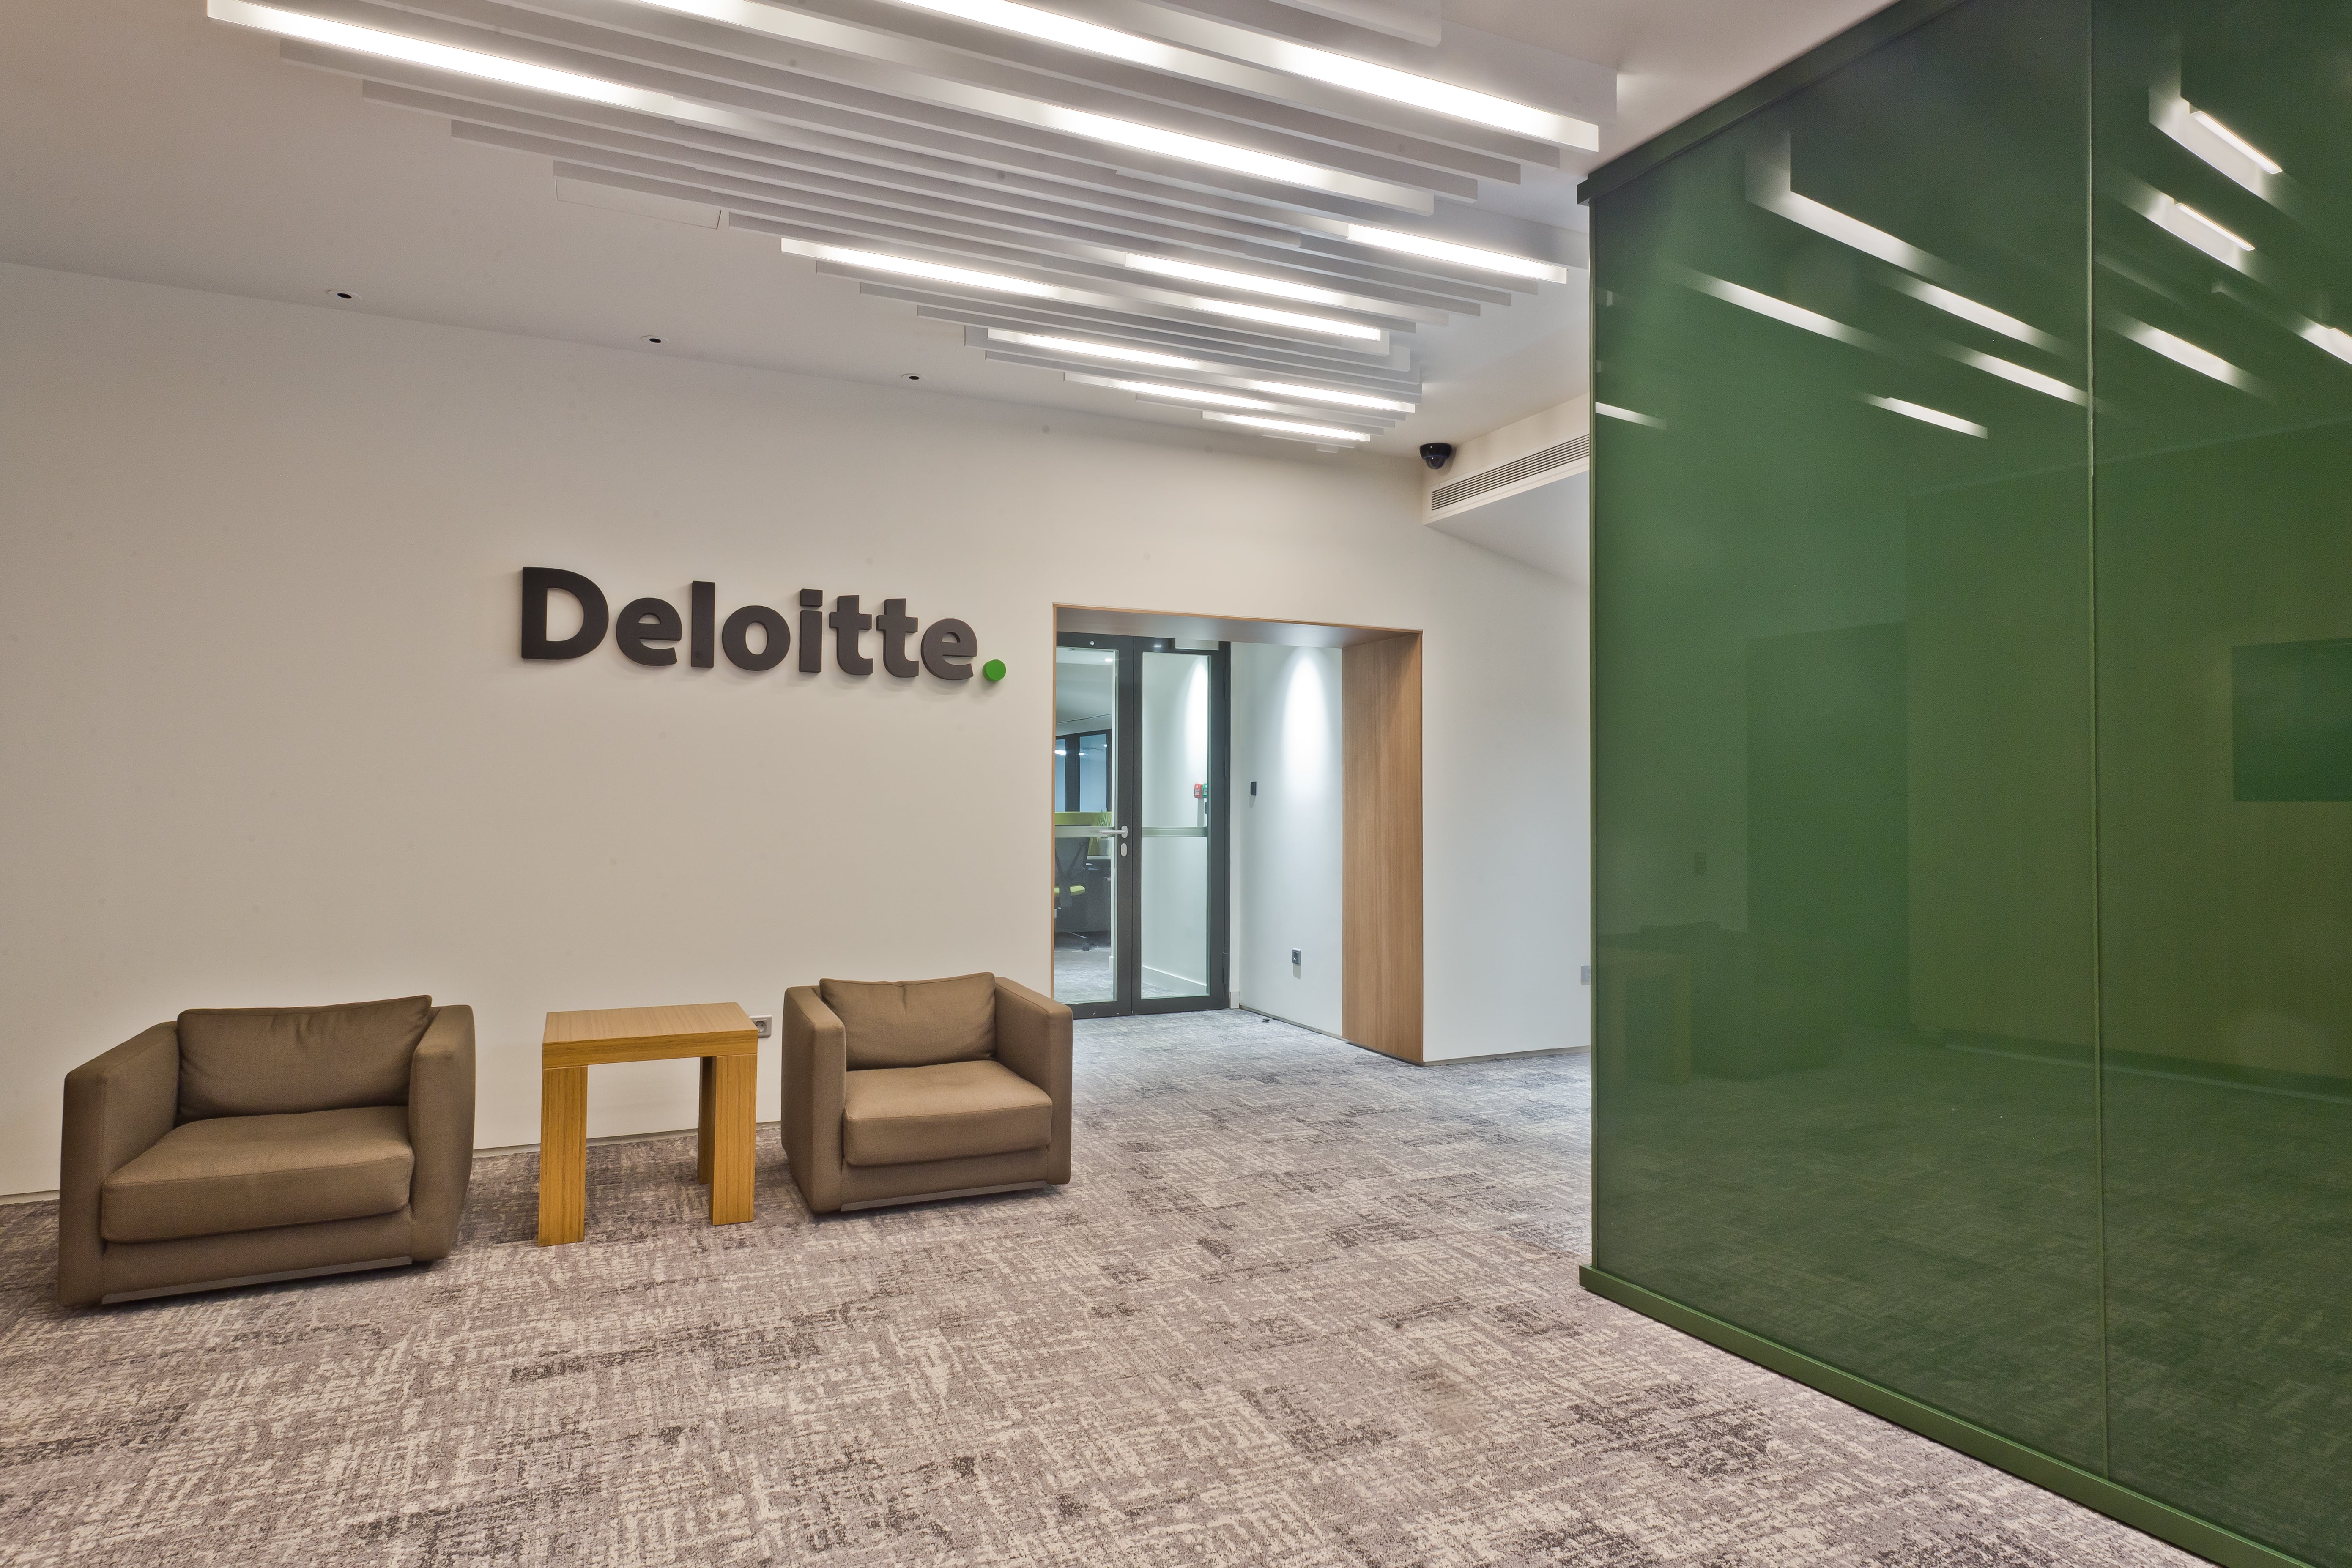 Project Delivered by Sato for Deloitte